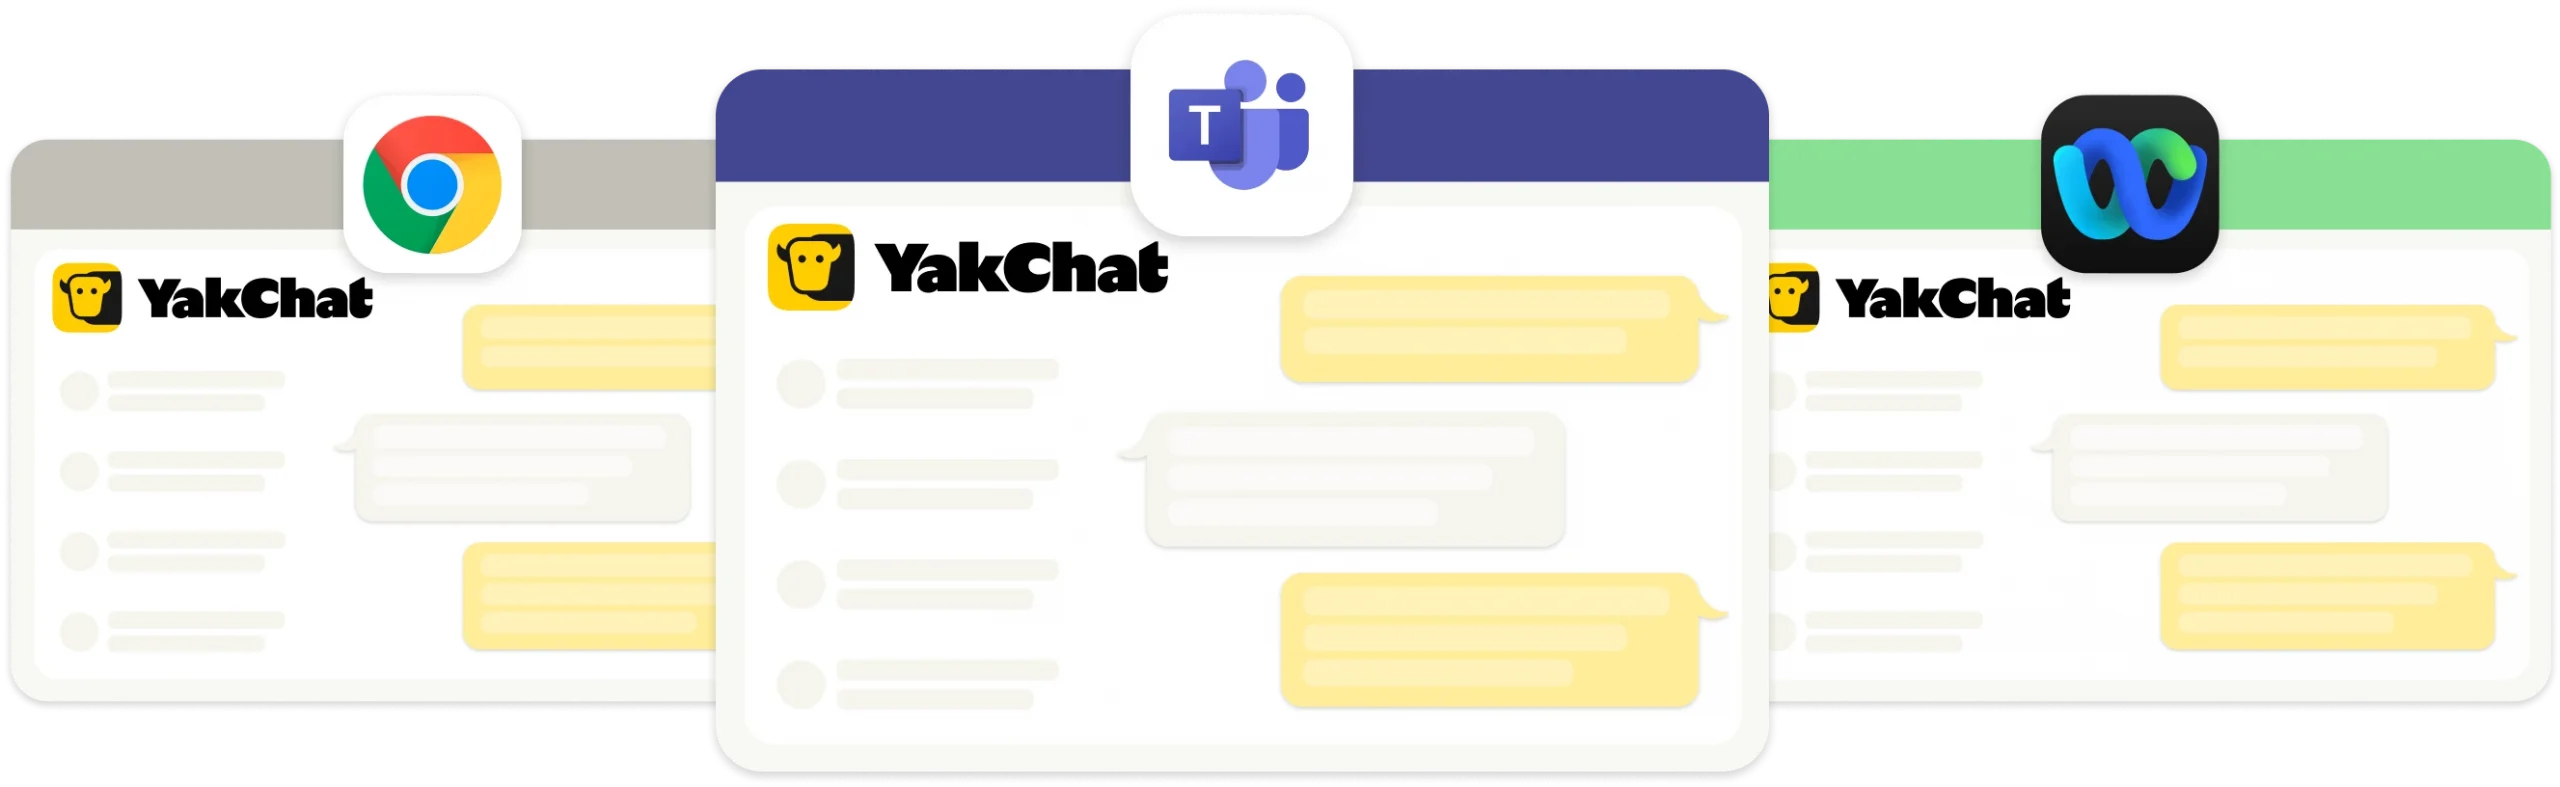 Illustration of YakChat being used in different apps